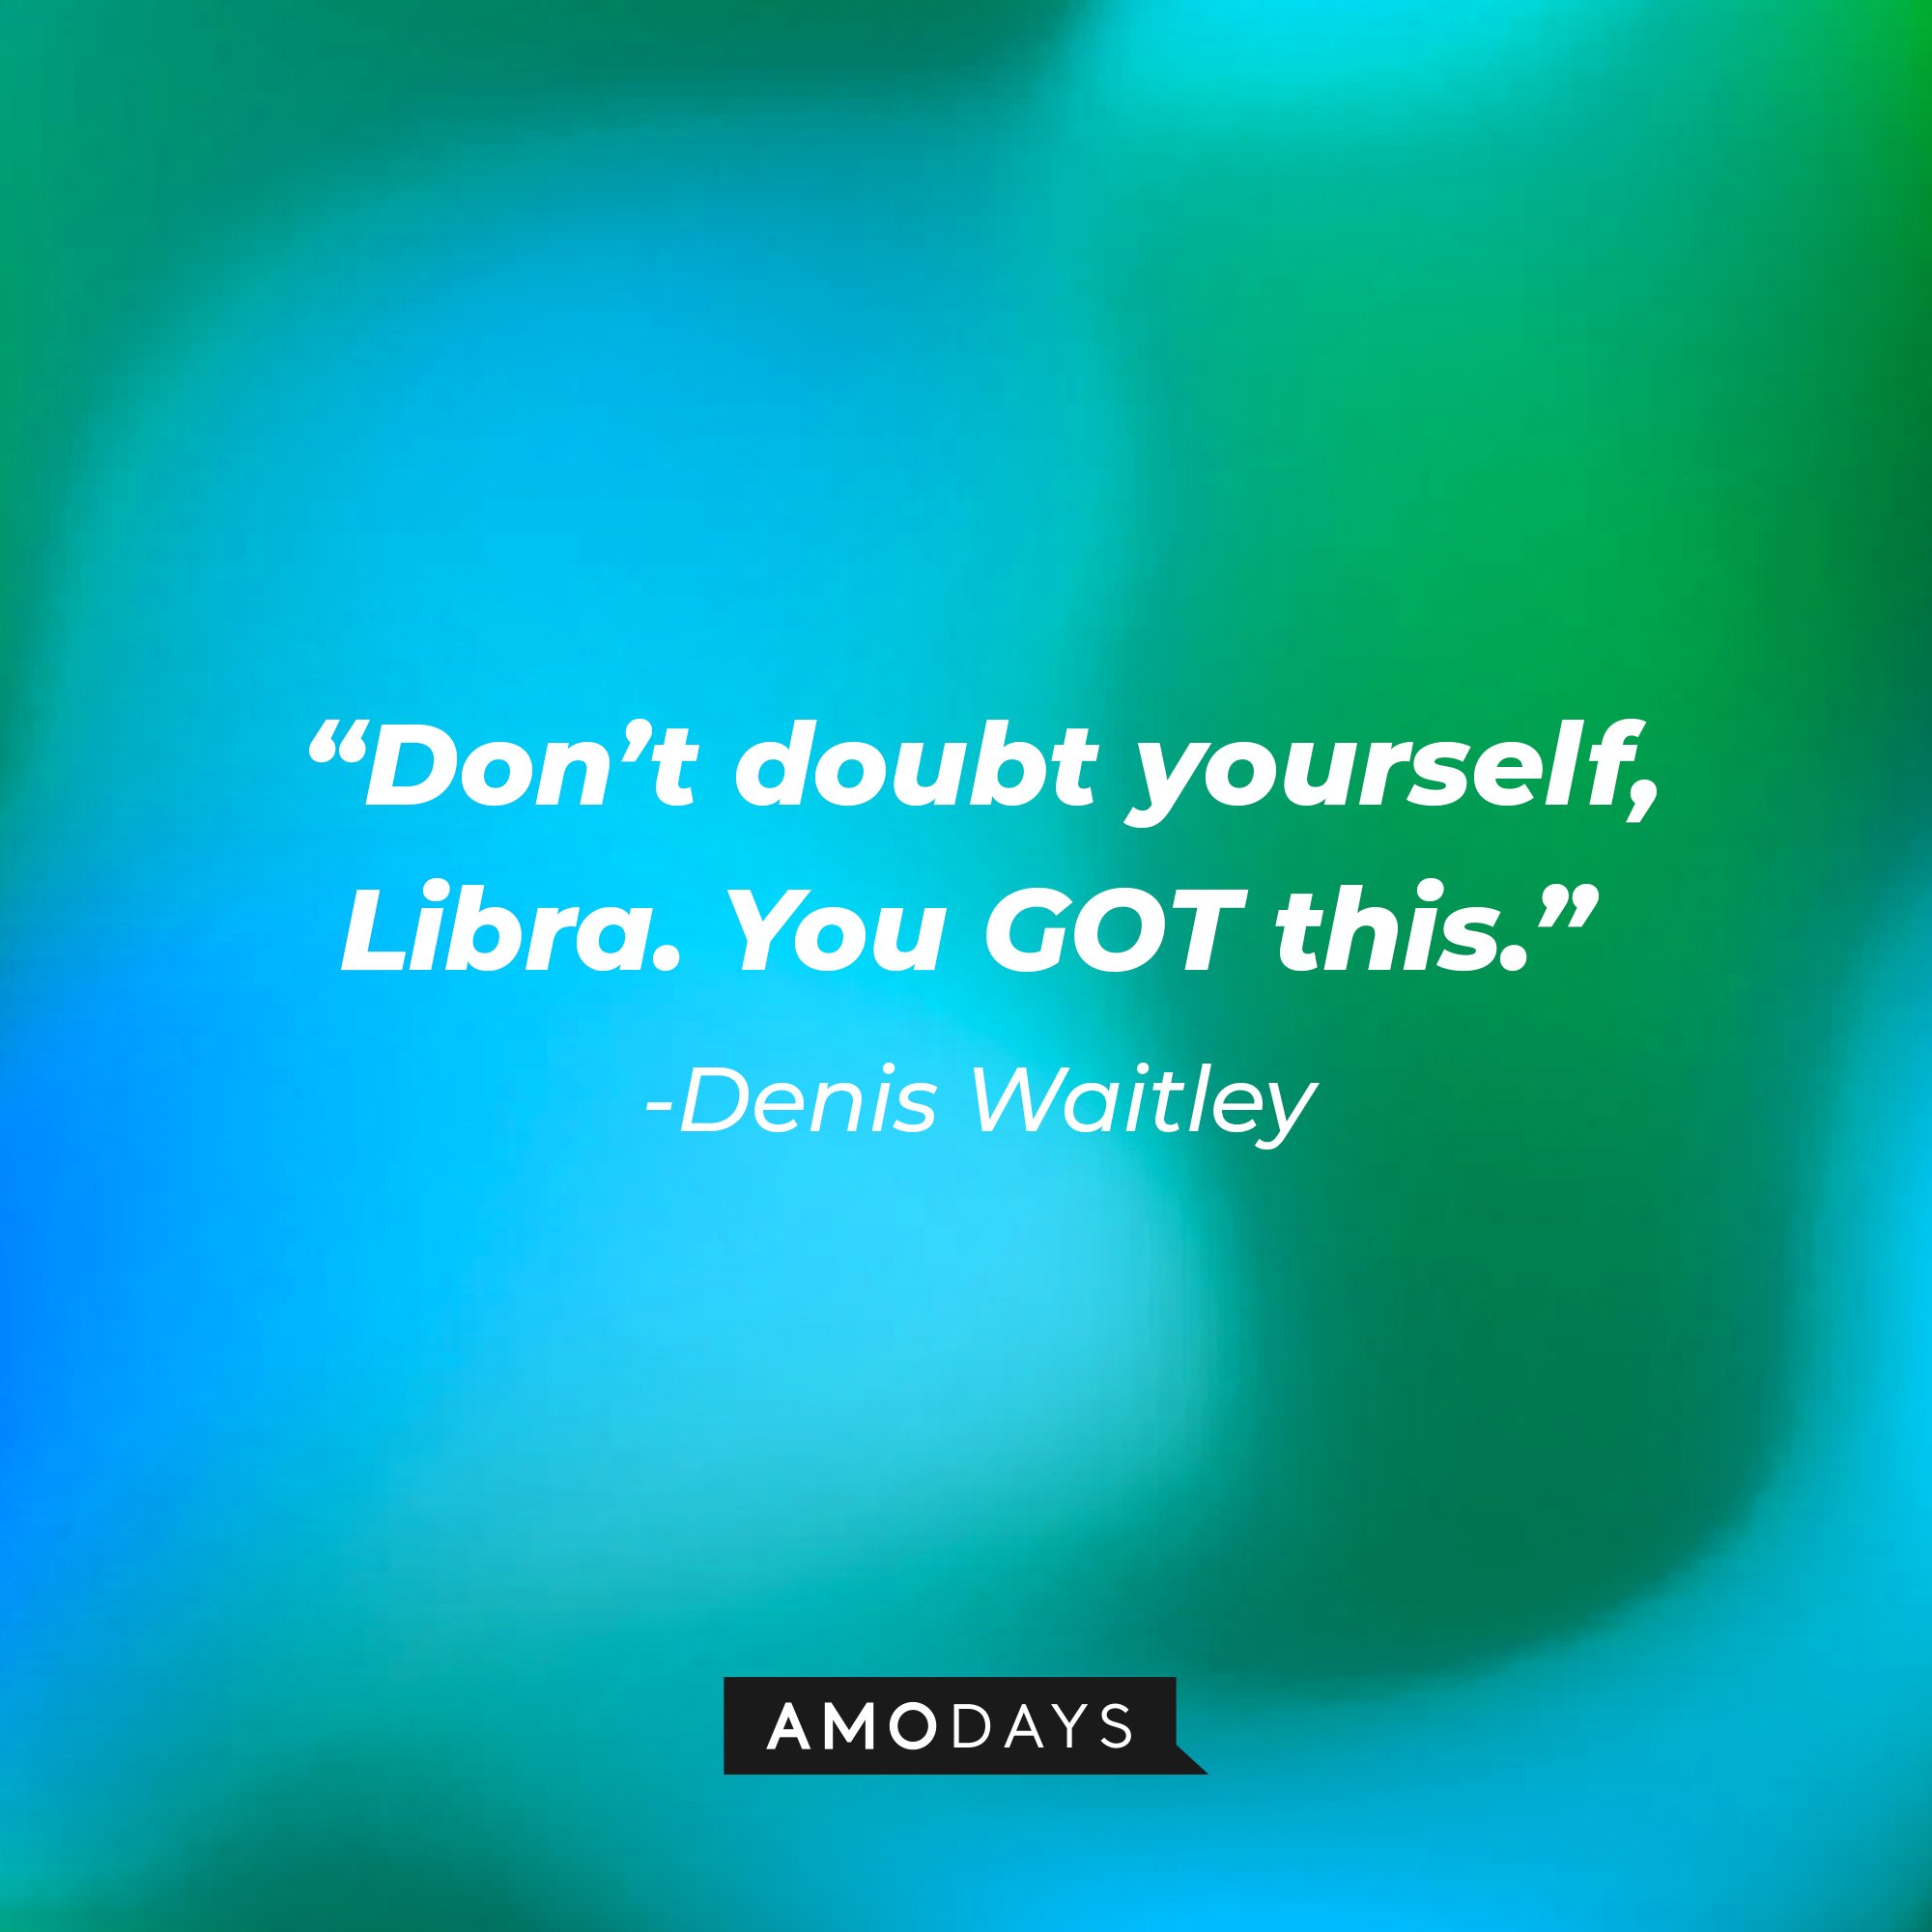 Denis Waitley's quote: "Don’t doubt yourself, Libra. You GOT this." | Image: AmoDays